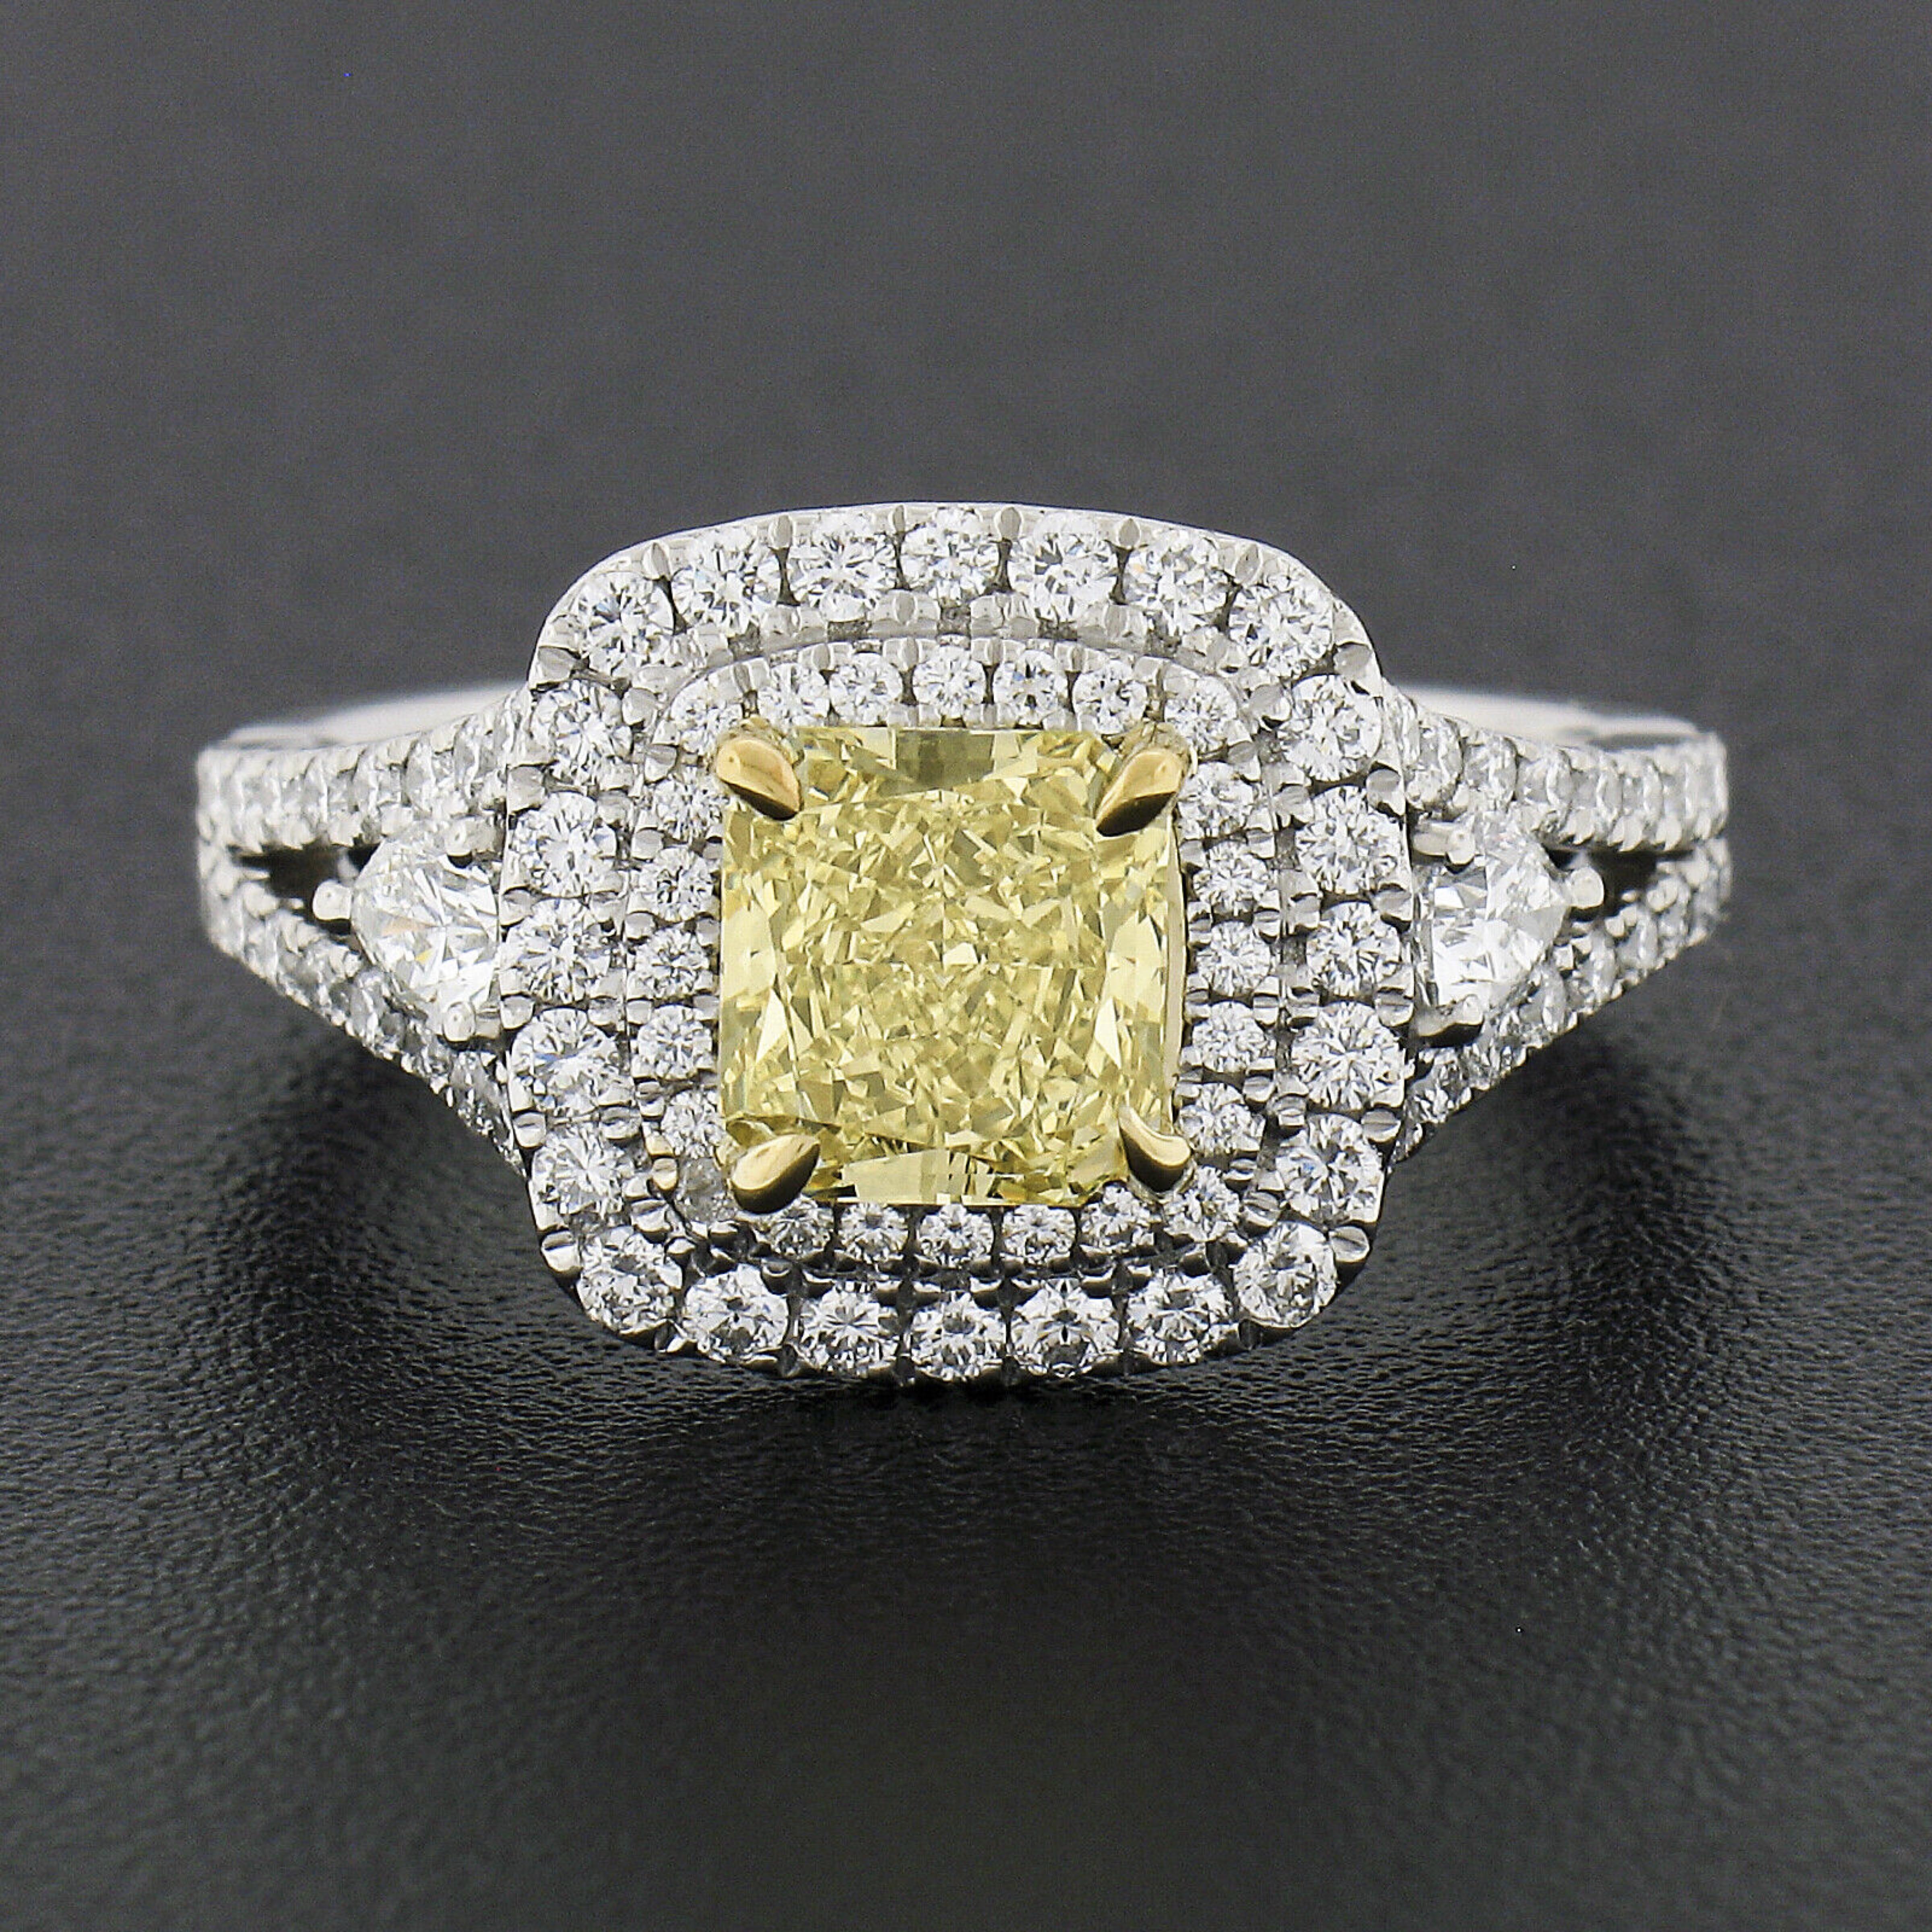 This truly breathtaking and very well made diamond engagement or cocktail ring is crafted in platinum and solid 18k yellow gold. The ring features a beautiful, GIA certified, fancy yellow diamond neatly prong set in the yellow gold center basket,